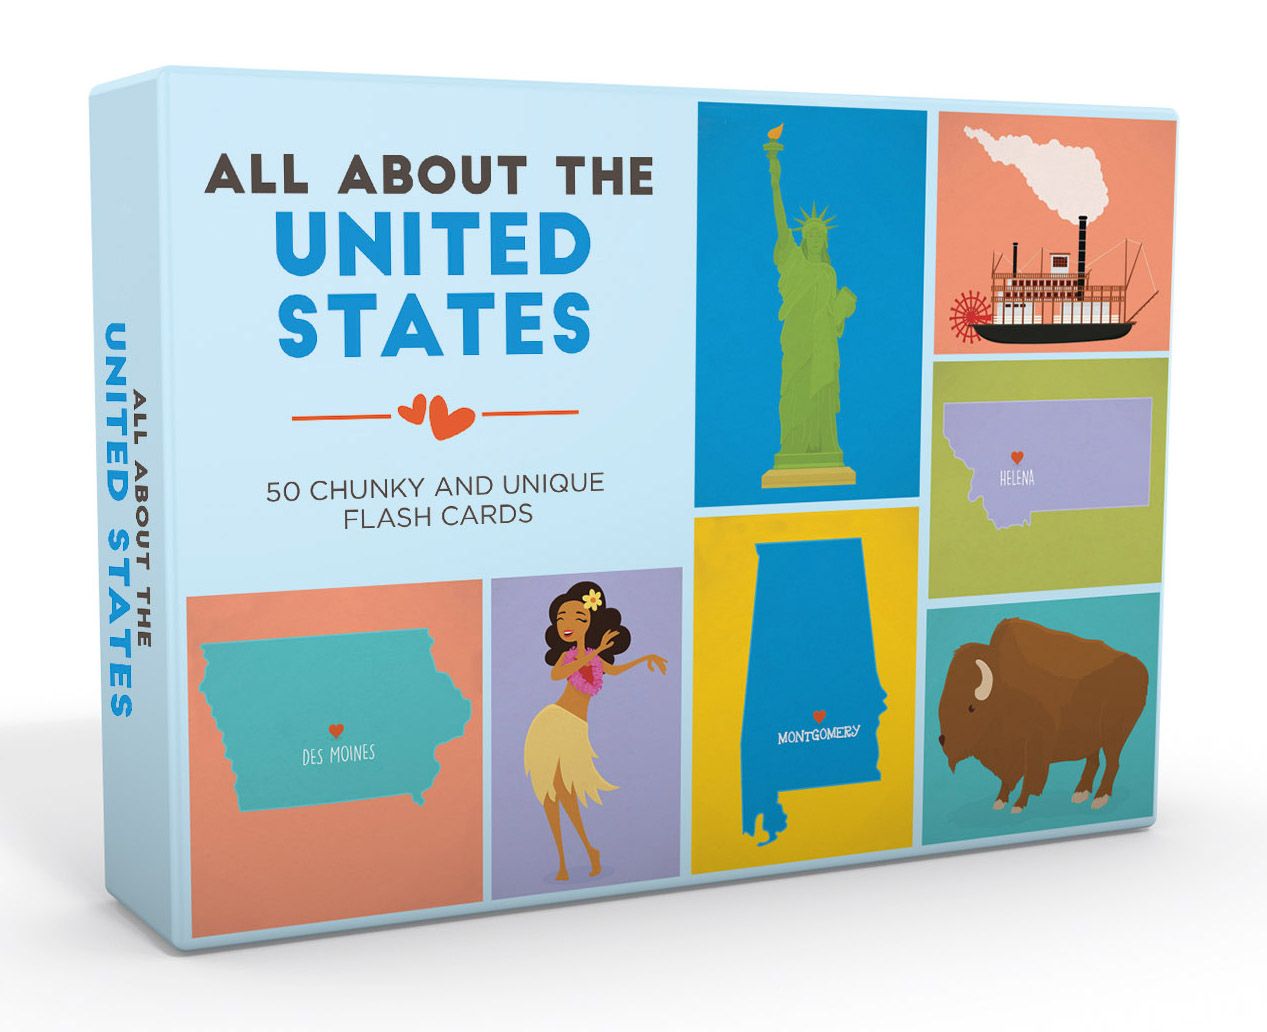 All About the United States Flash Cards